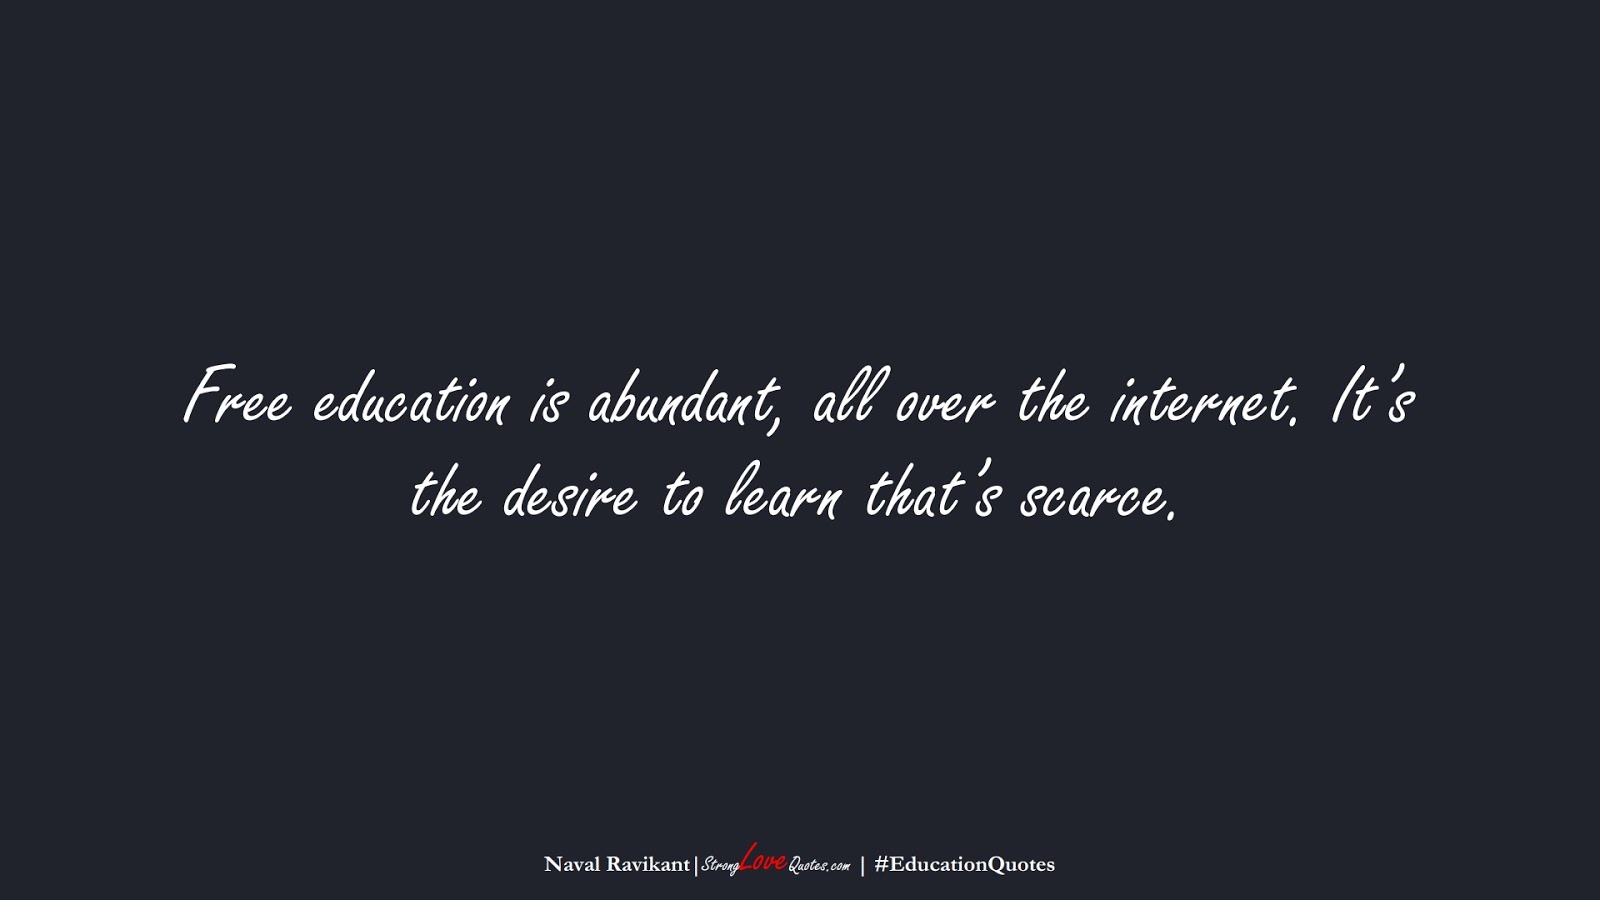 Free education is abundant, all over the internet. It’s the desire to learn that’s scarce. (Naval Ravikant);  #EducationQuotes